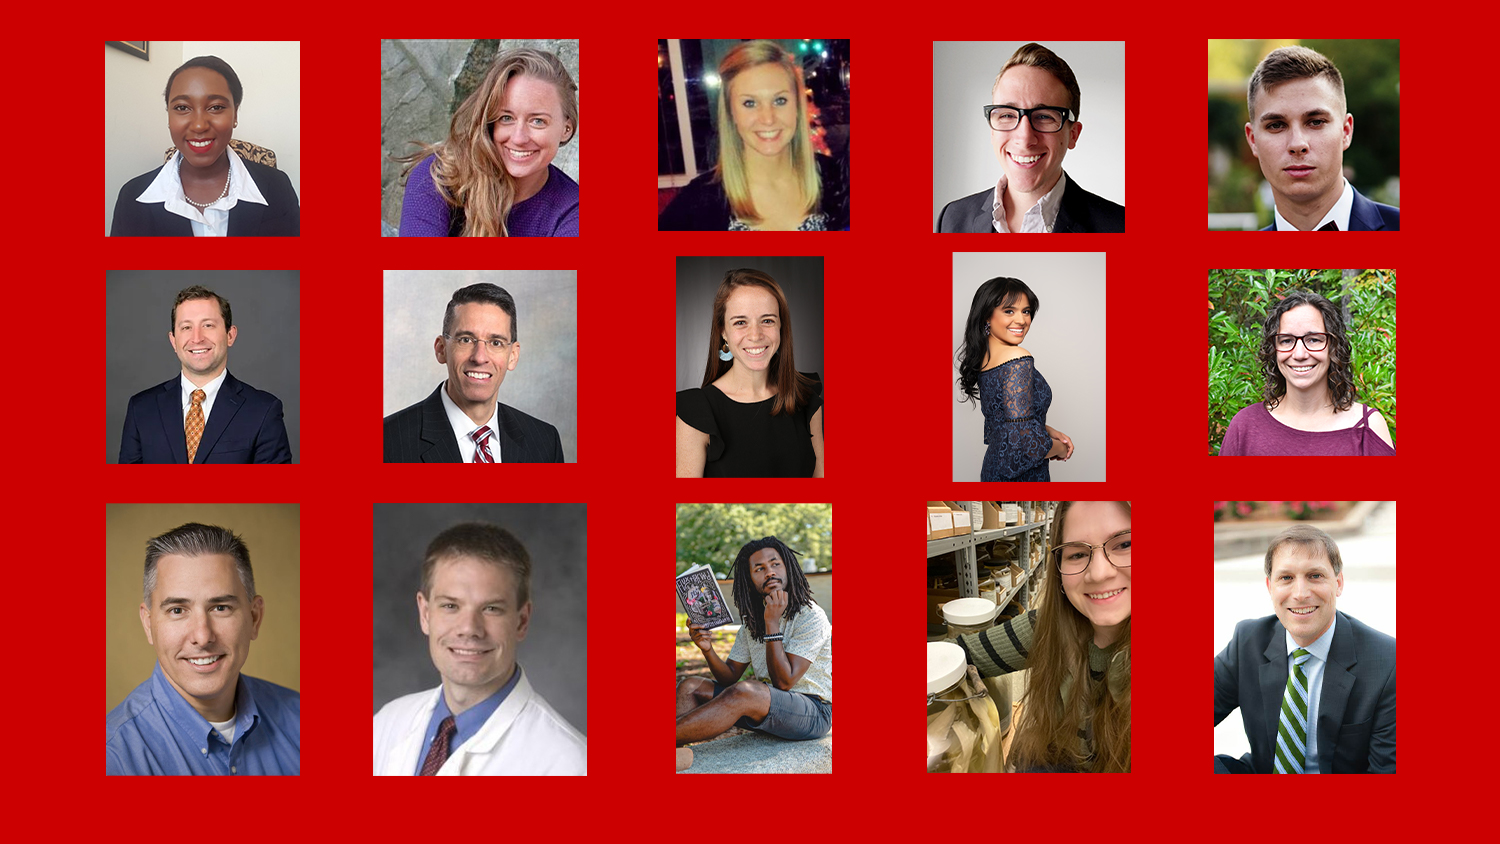 Photos of Career Conversations speakers in front of a red background